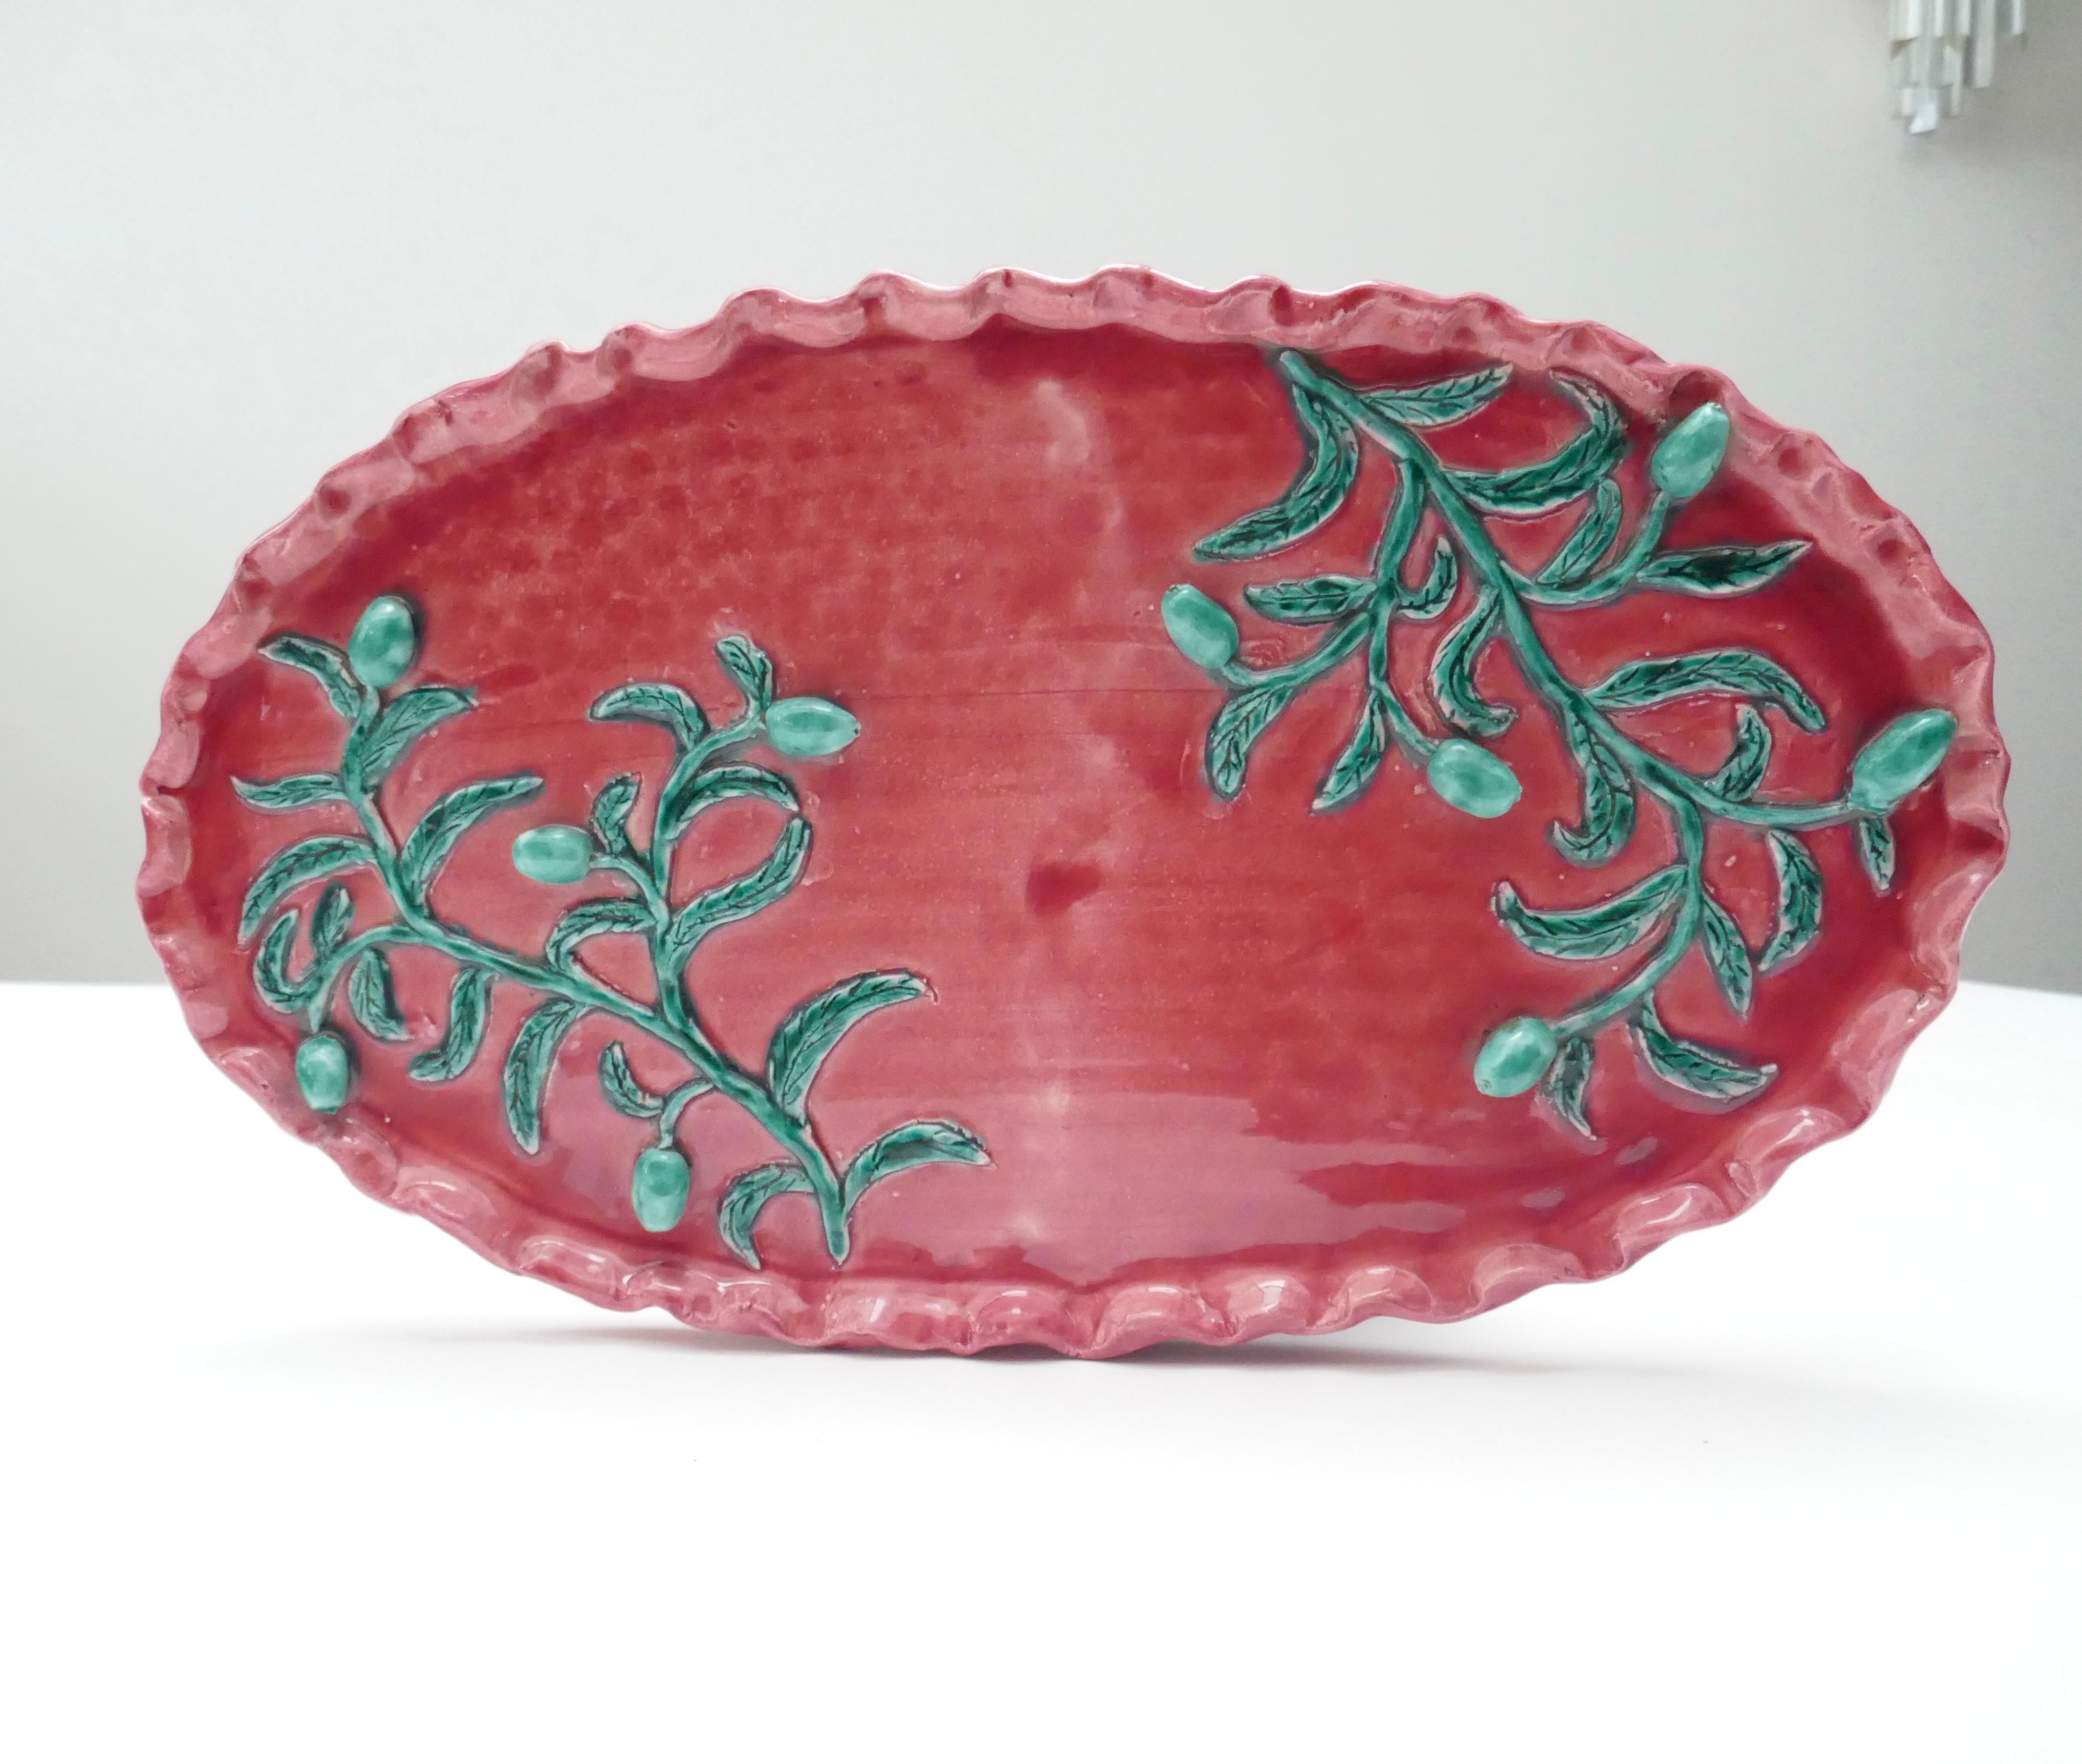 Large pottery centrepiece glazed in glossy red/raspberry enamel with raised glossy green enamel olives branches .

Signed Jerome Massier creation Paule Ville. Unique piece.

Designers of Mediterranean decorative ceramics, the Massiers were great